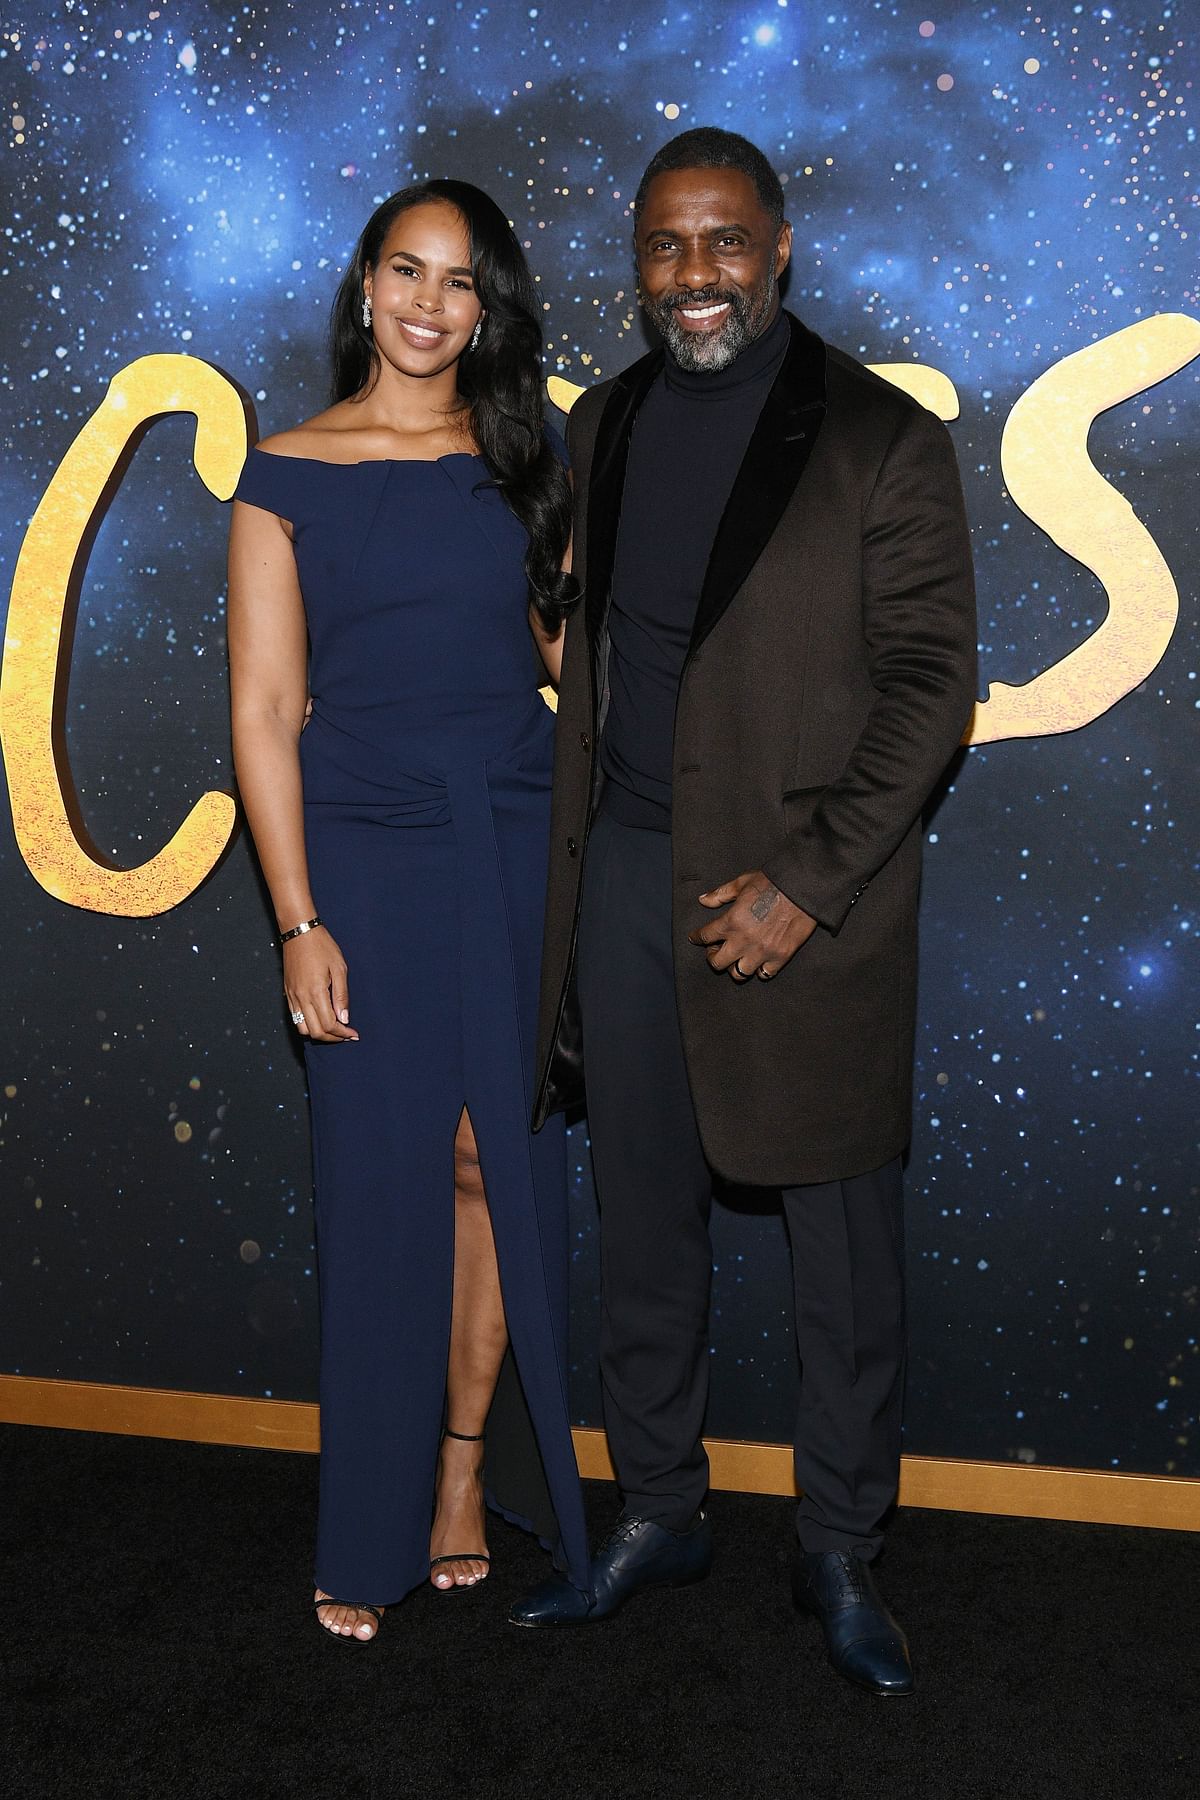 Sabrina Dhowre Elba and Idris Elba attend the world premiere of `Cats` at Alice Tully Hall, Lincoln Center on 16 December 2019 in New York City. Photo: AFP